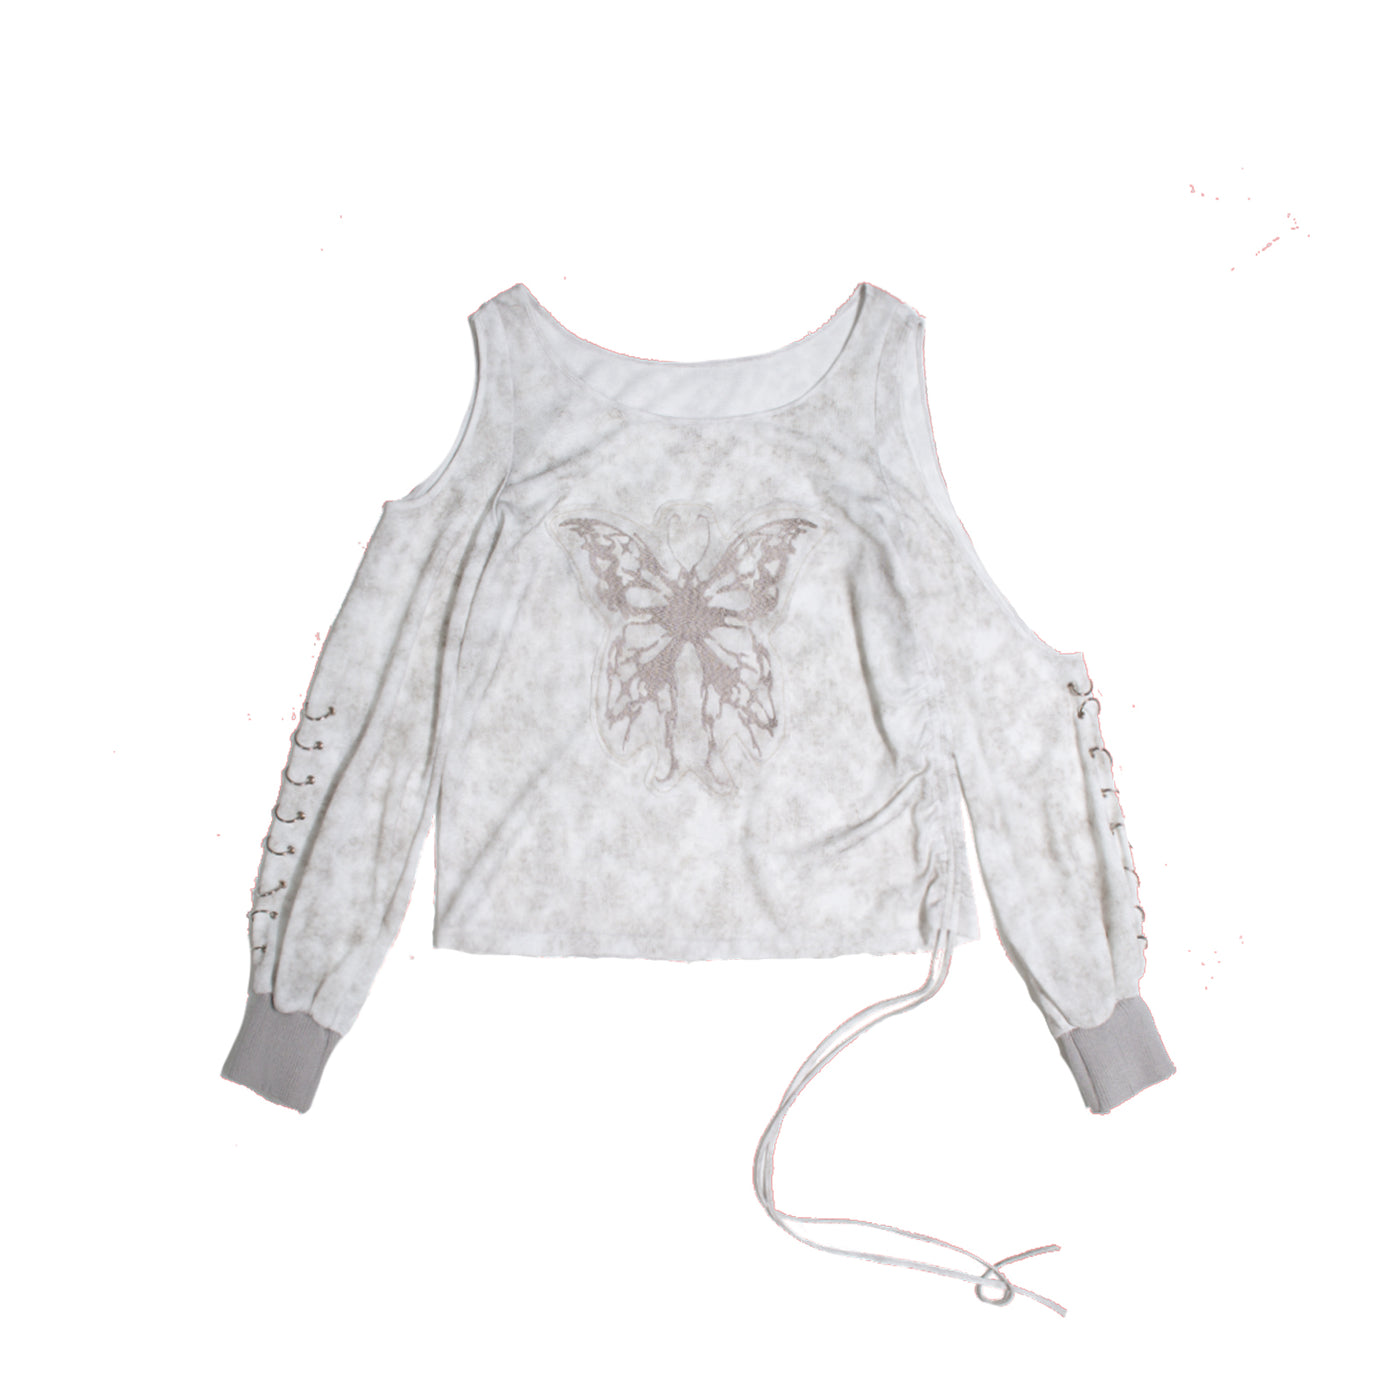 [ARIADNAw]Partial lack type butterfly design string T-shirt AD0004